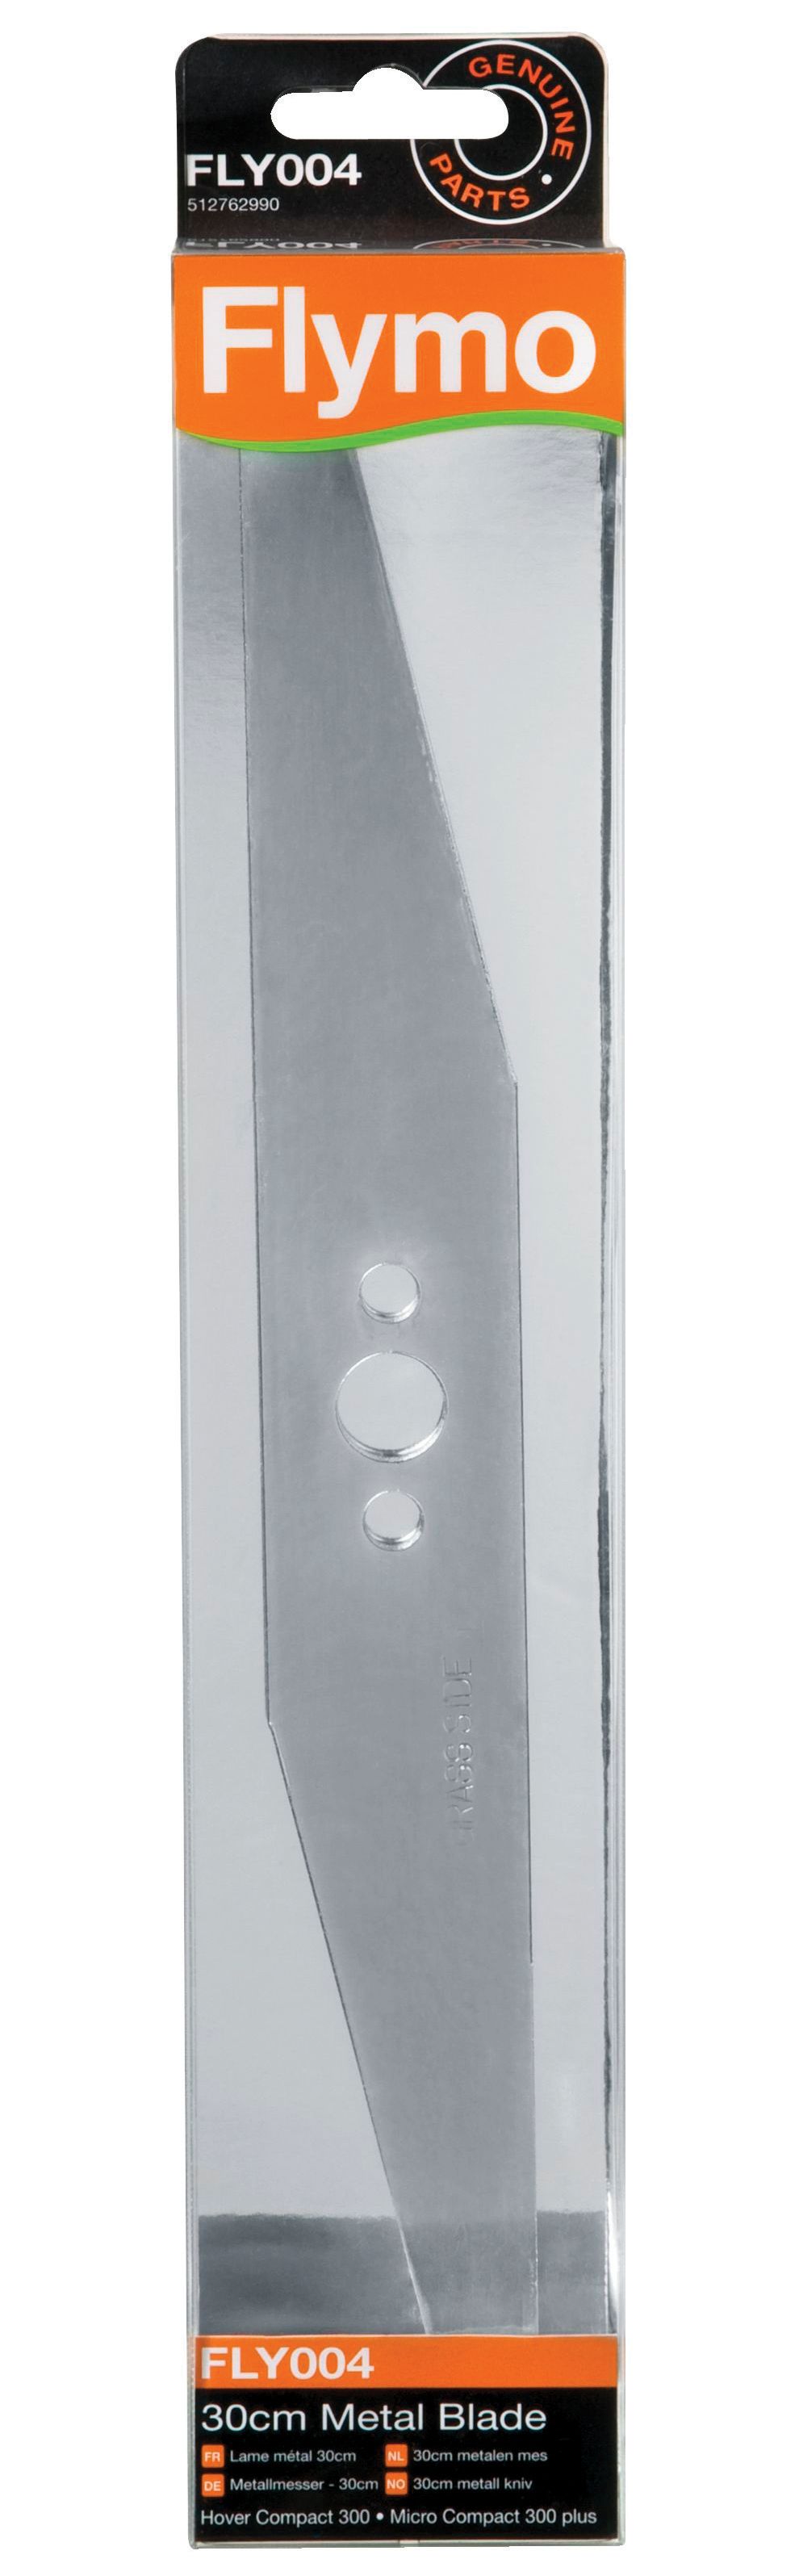 Image of The Flymo FLY004 Metal Lawnmower Blade - 30cm